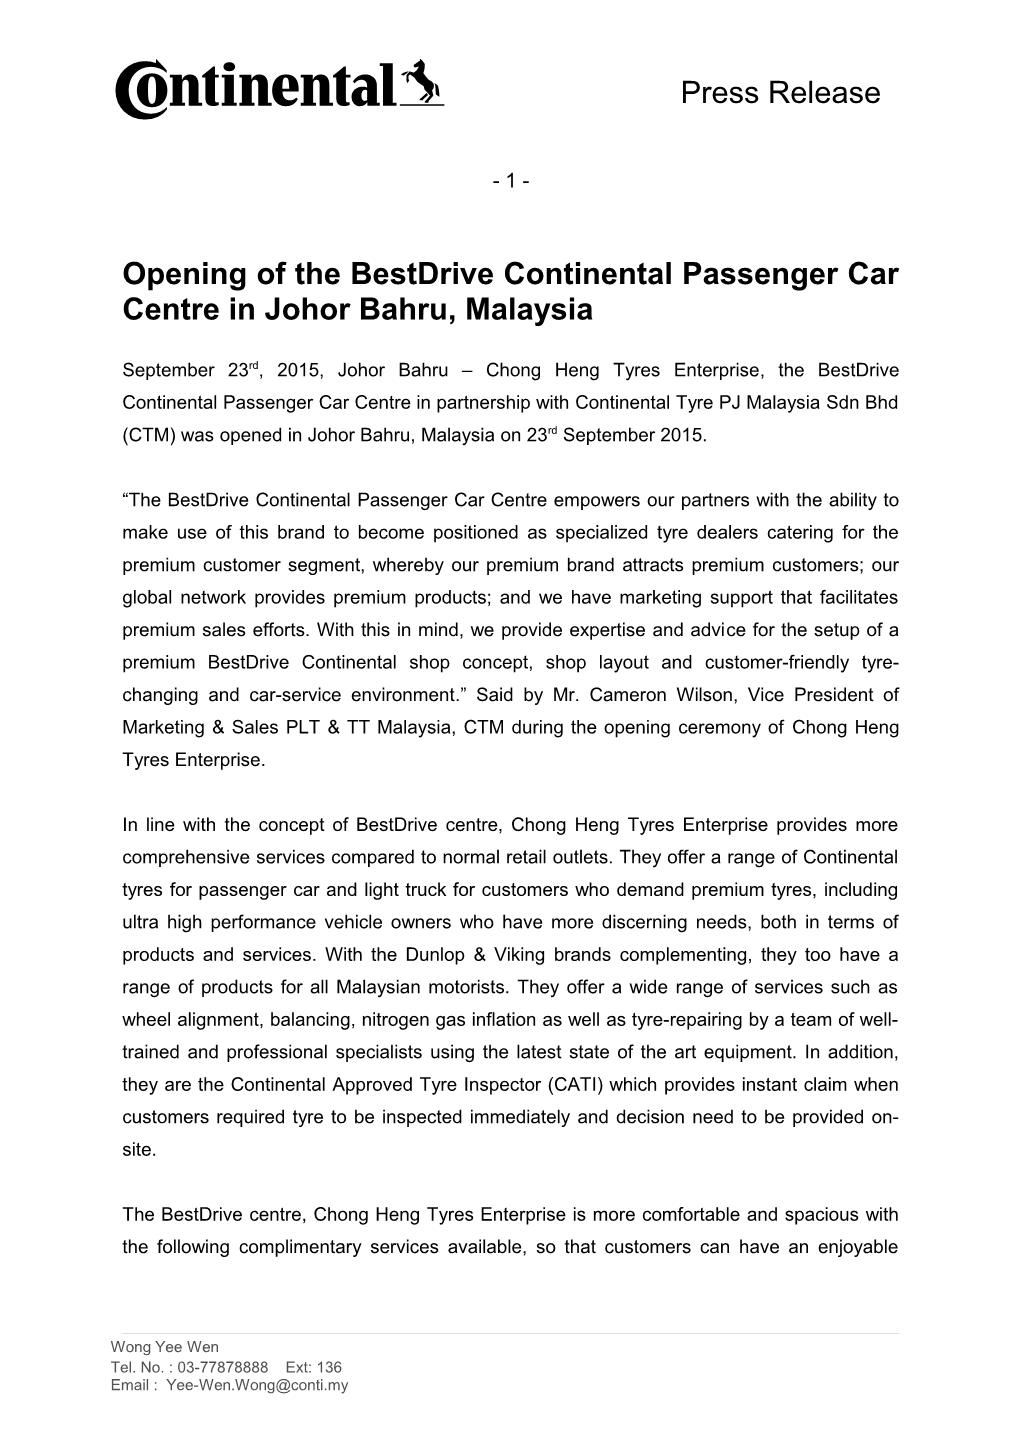 Opening of the Bestdrive Continental Passenger Car Centre in Johor Bahru, Malaysia